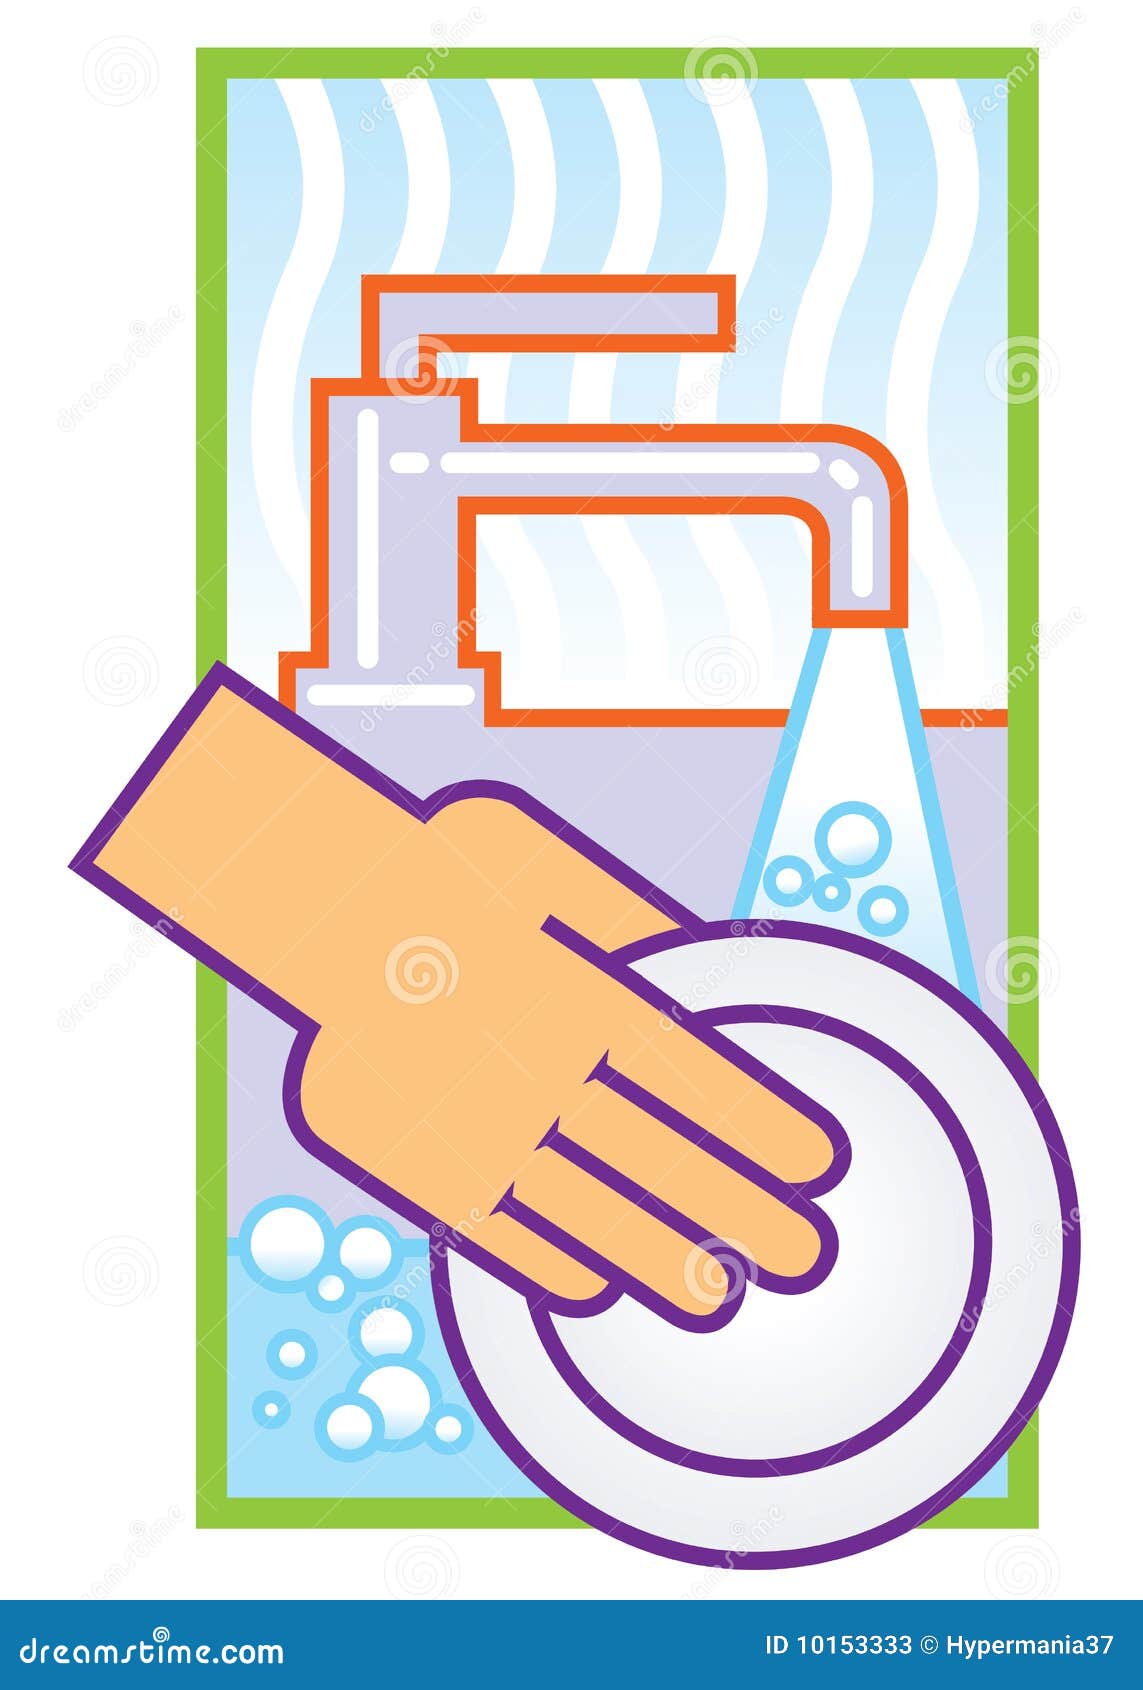 free clipart images dirty dishes - photo #45